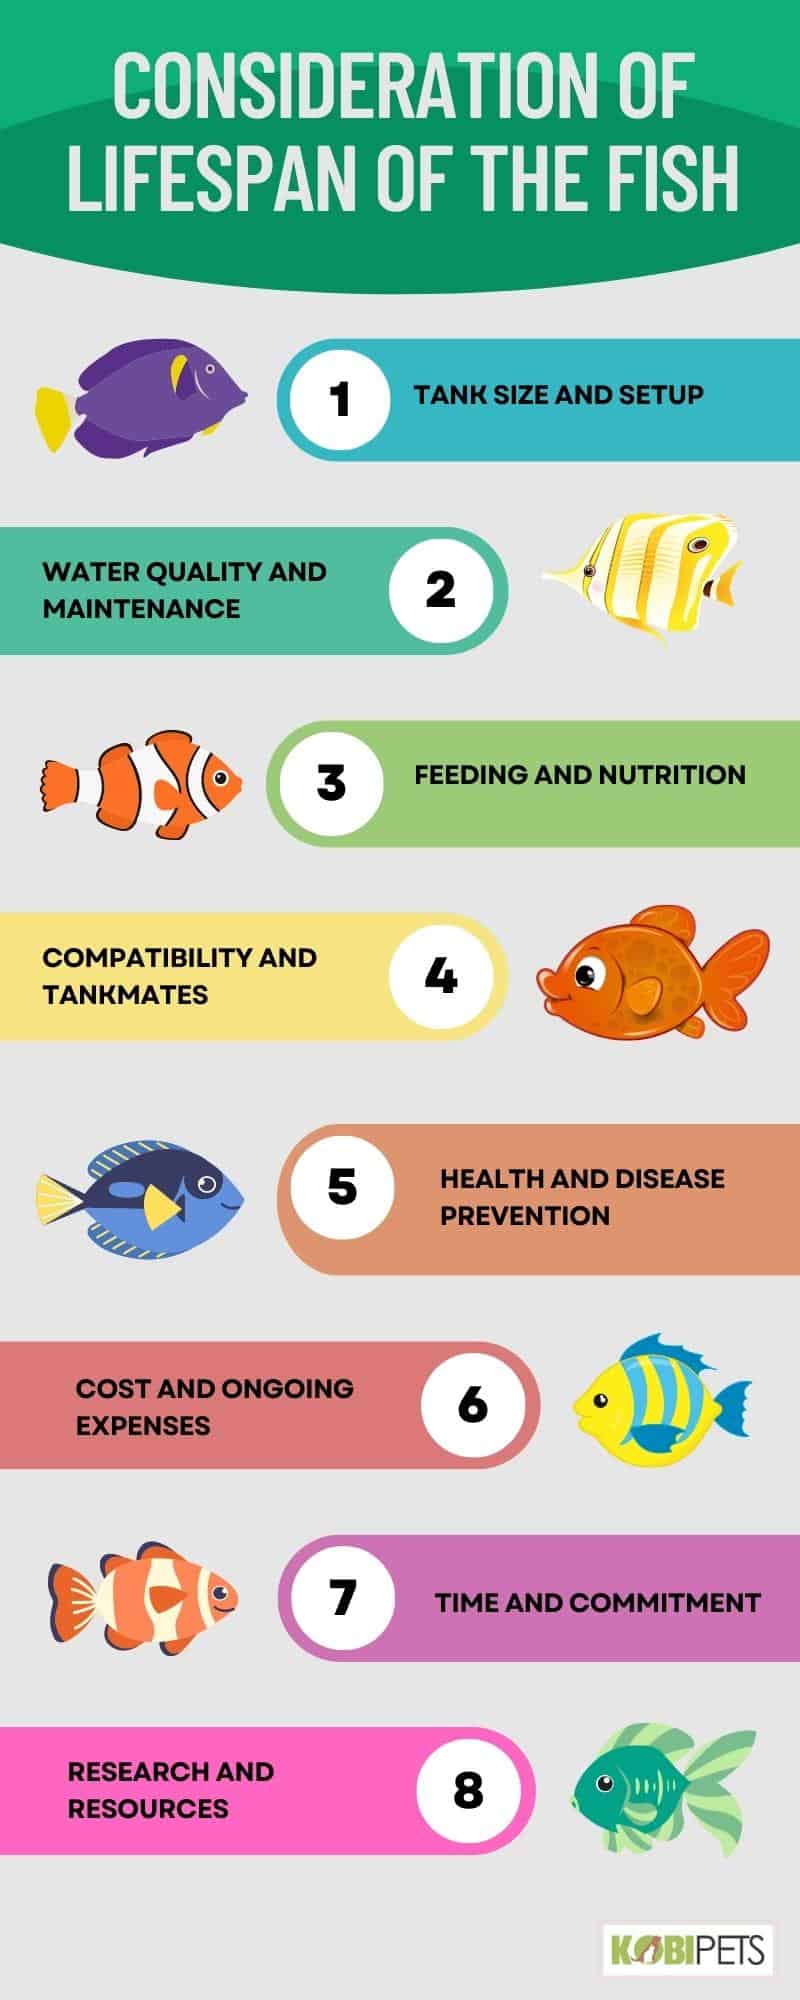 Consideration of Lifespan of the Fish